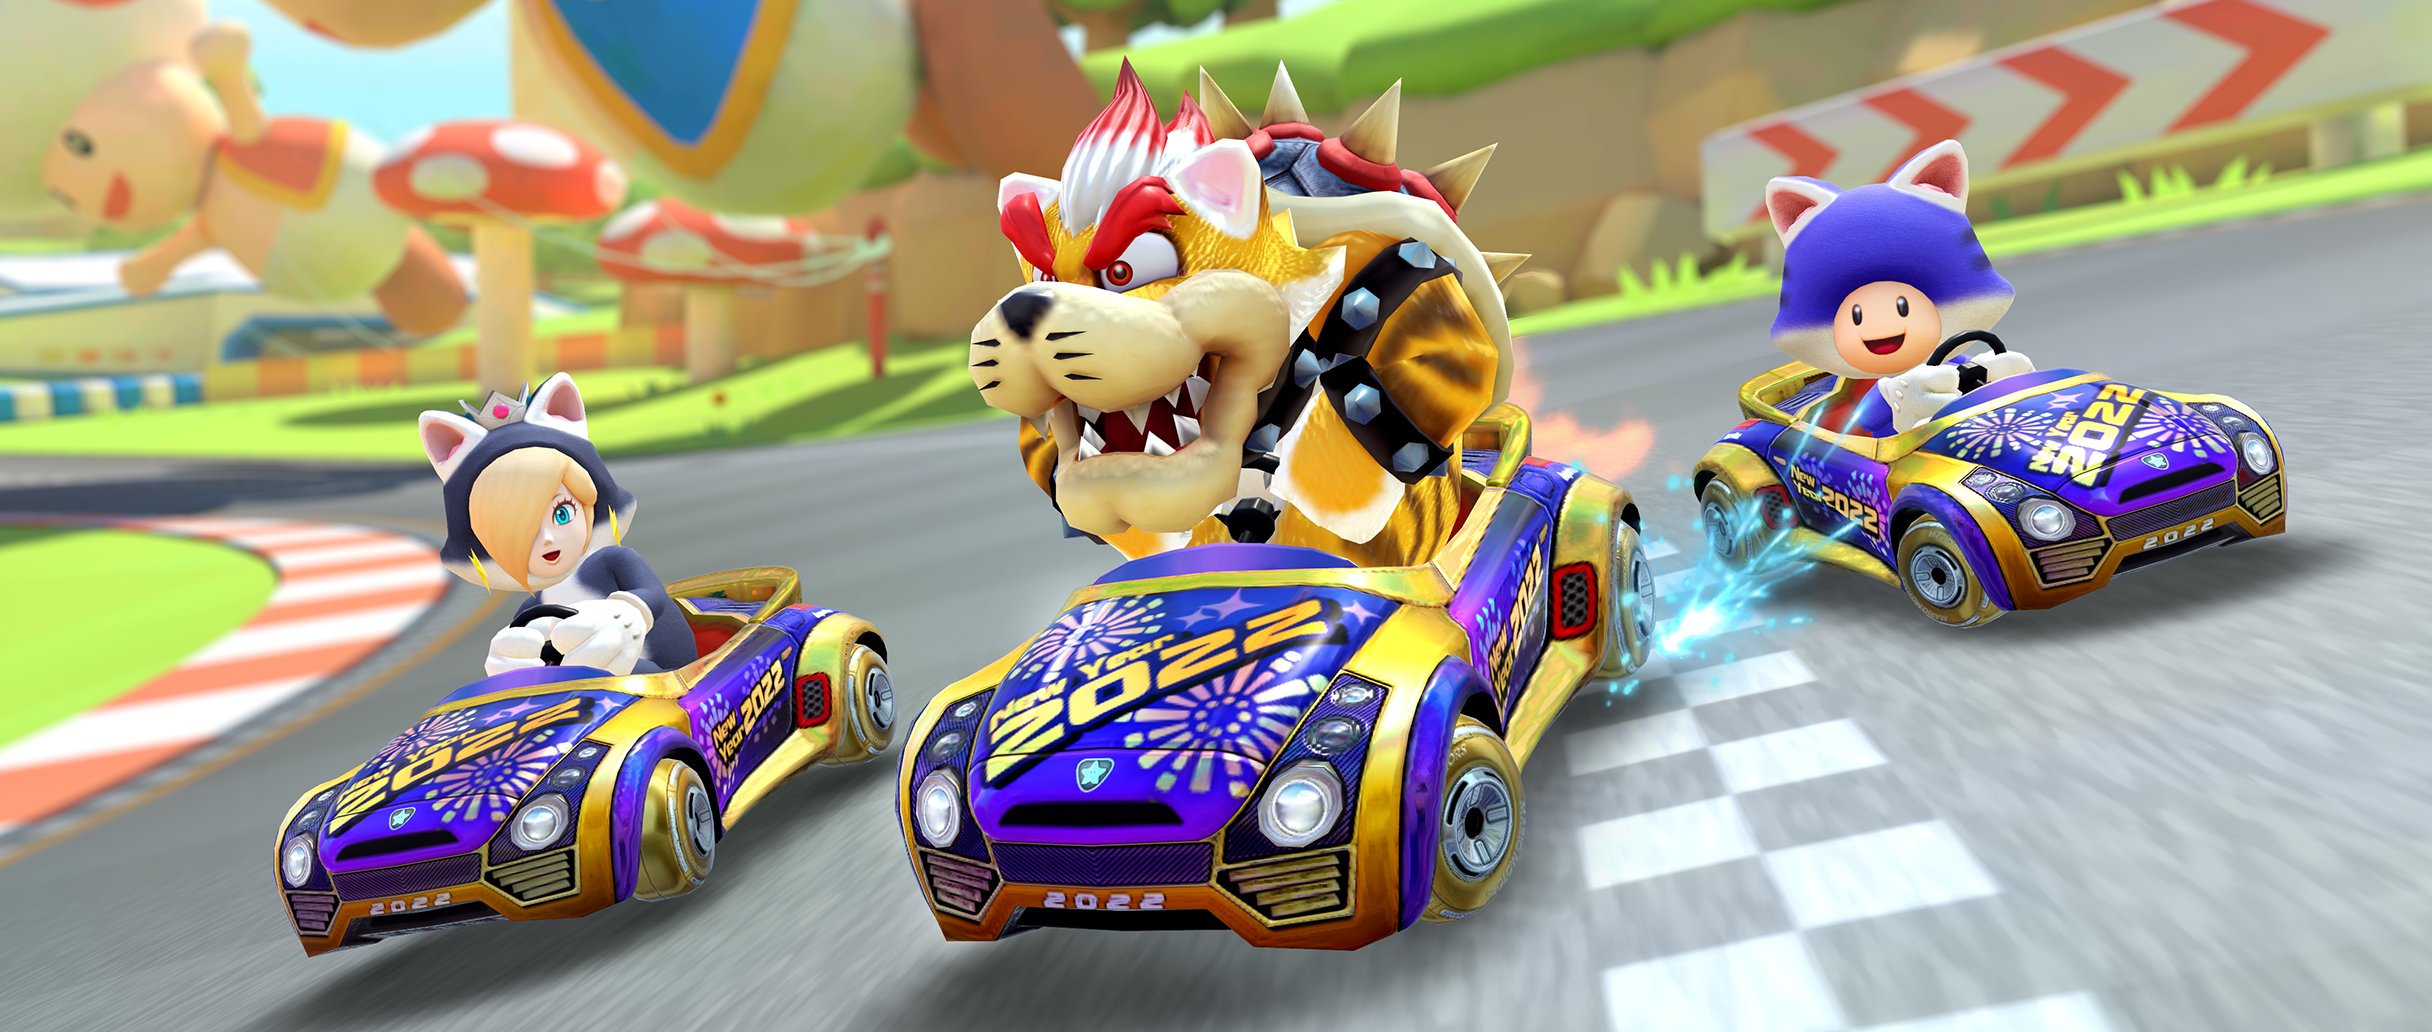 The Holiday Tour begins in the Mario Kart Tour game